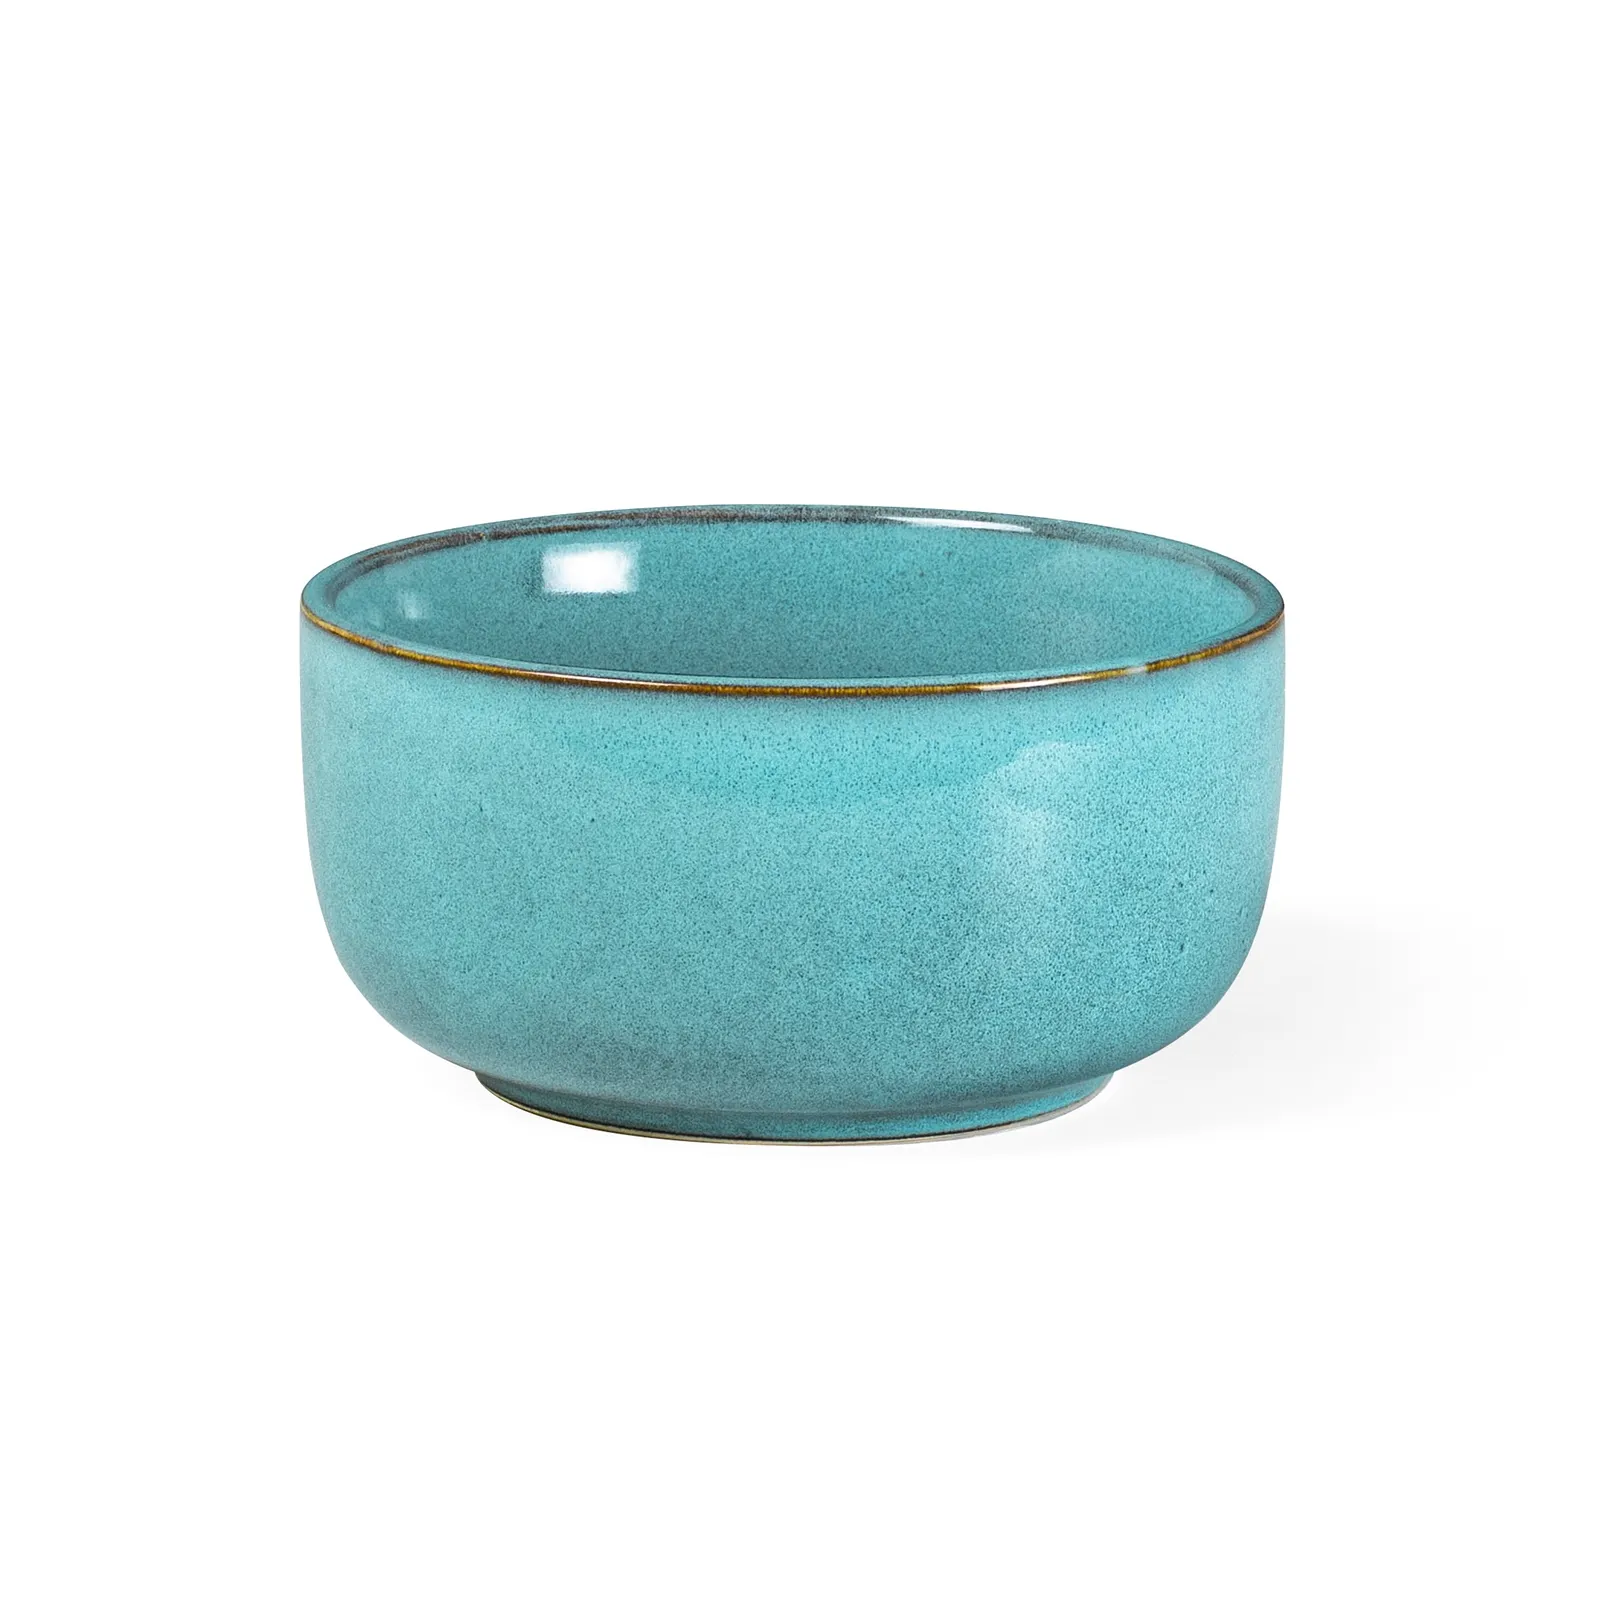 2023 Factory Price New Product Small Porcelain Bowl Ceramic Bowl Porcelain Bowl With Household